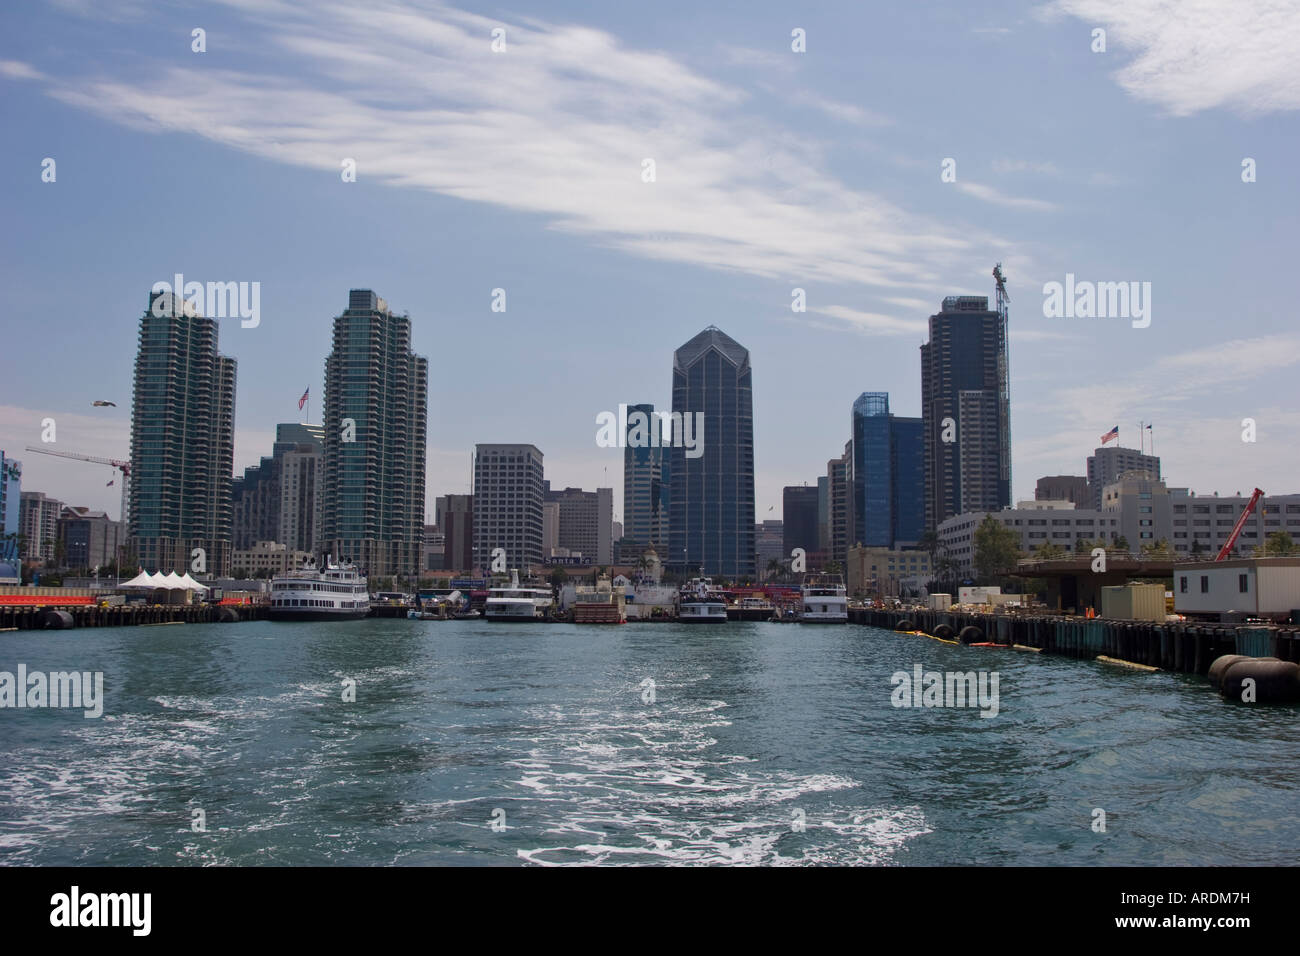 San Diego Waterfront and Skyline, as seen from the harbor Stock Photo